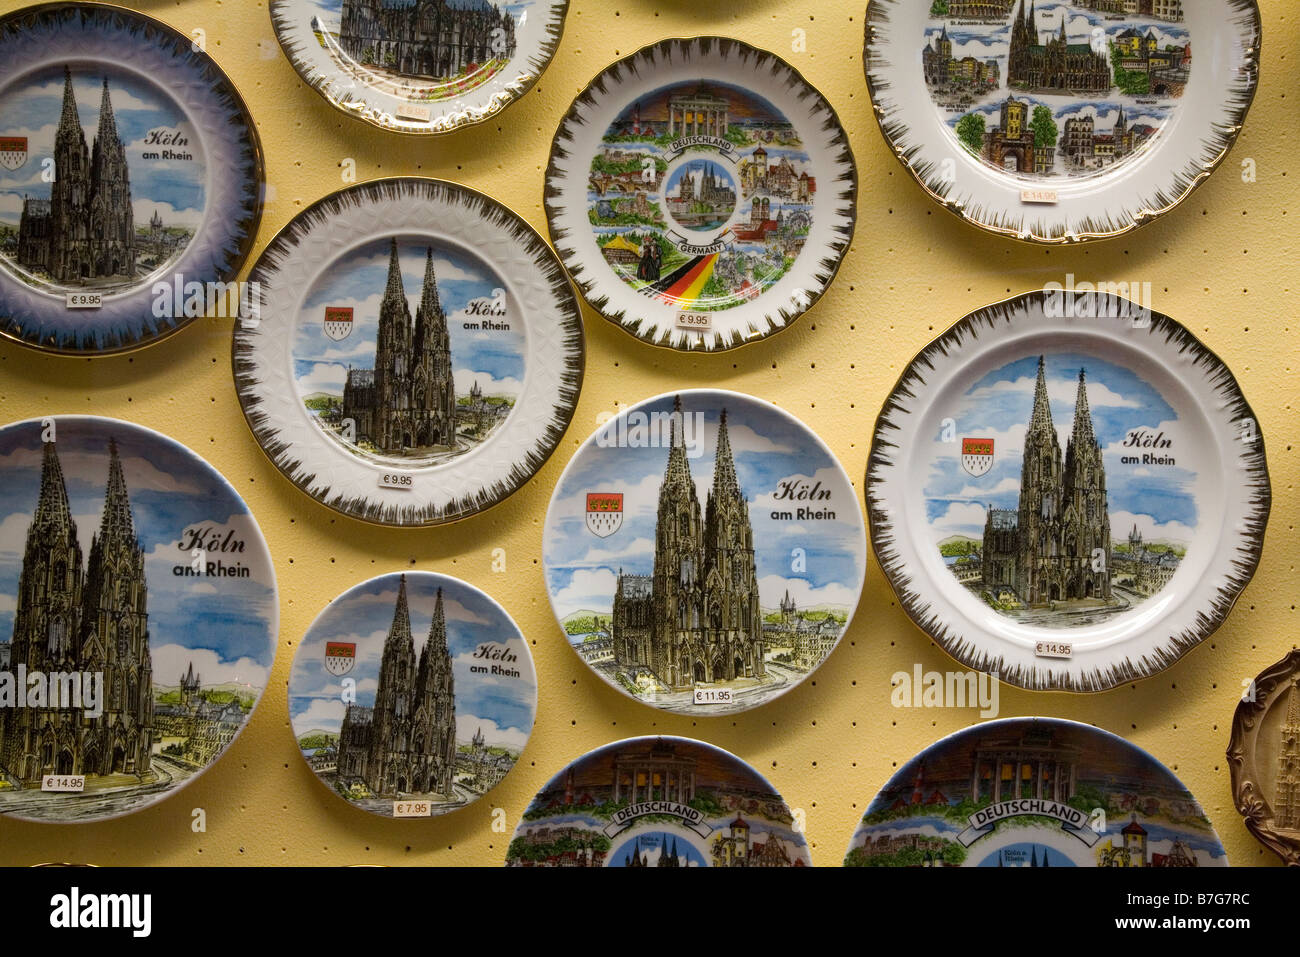 Souvenir plates on sale depicting Cologne Cathedral, Germany Stock Photo